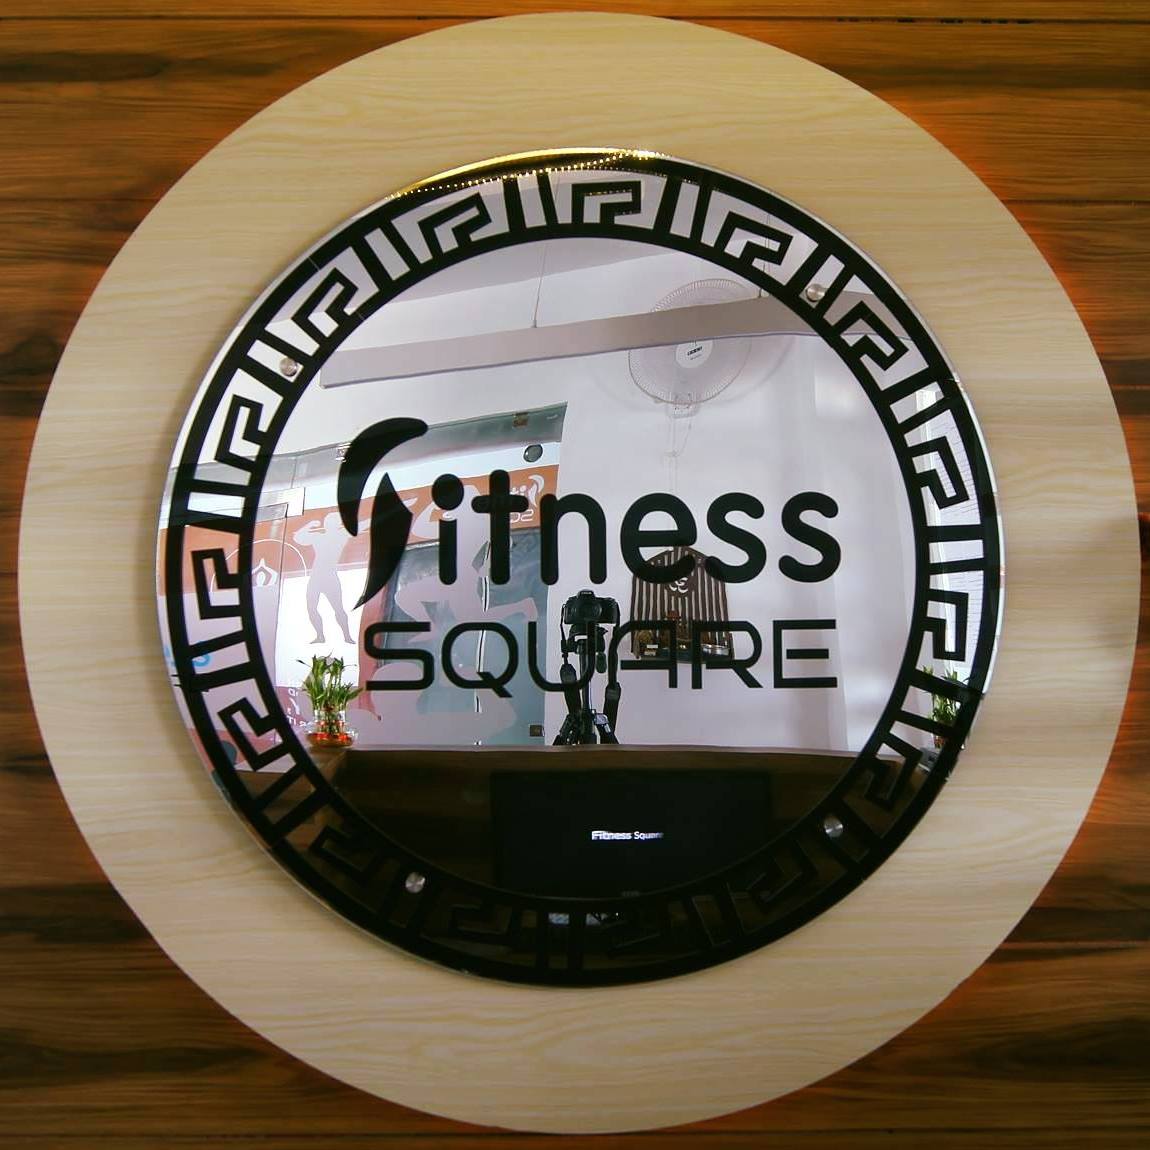 Fitness Square|Gym and Fitness Centre|Active Life